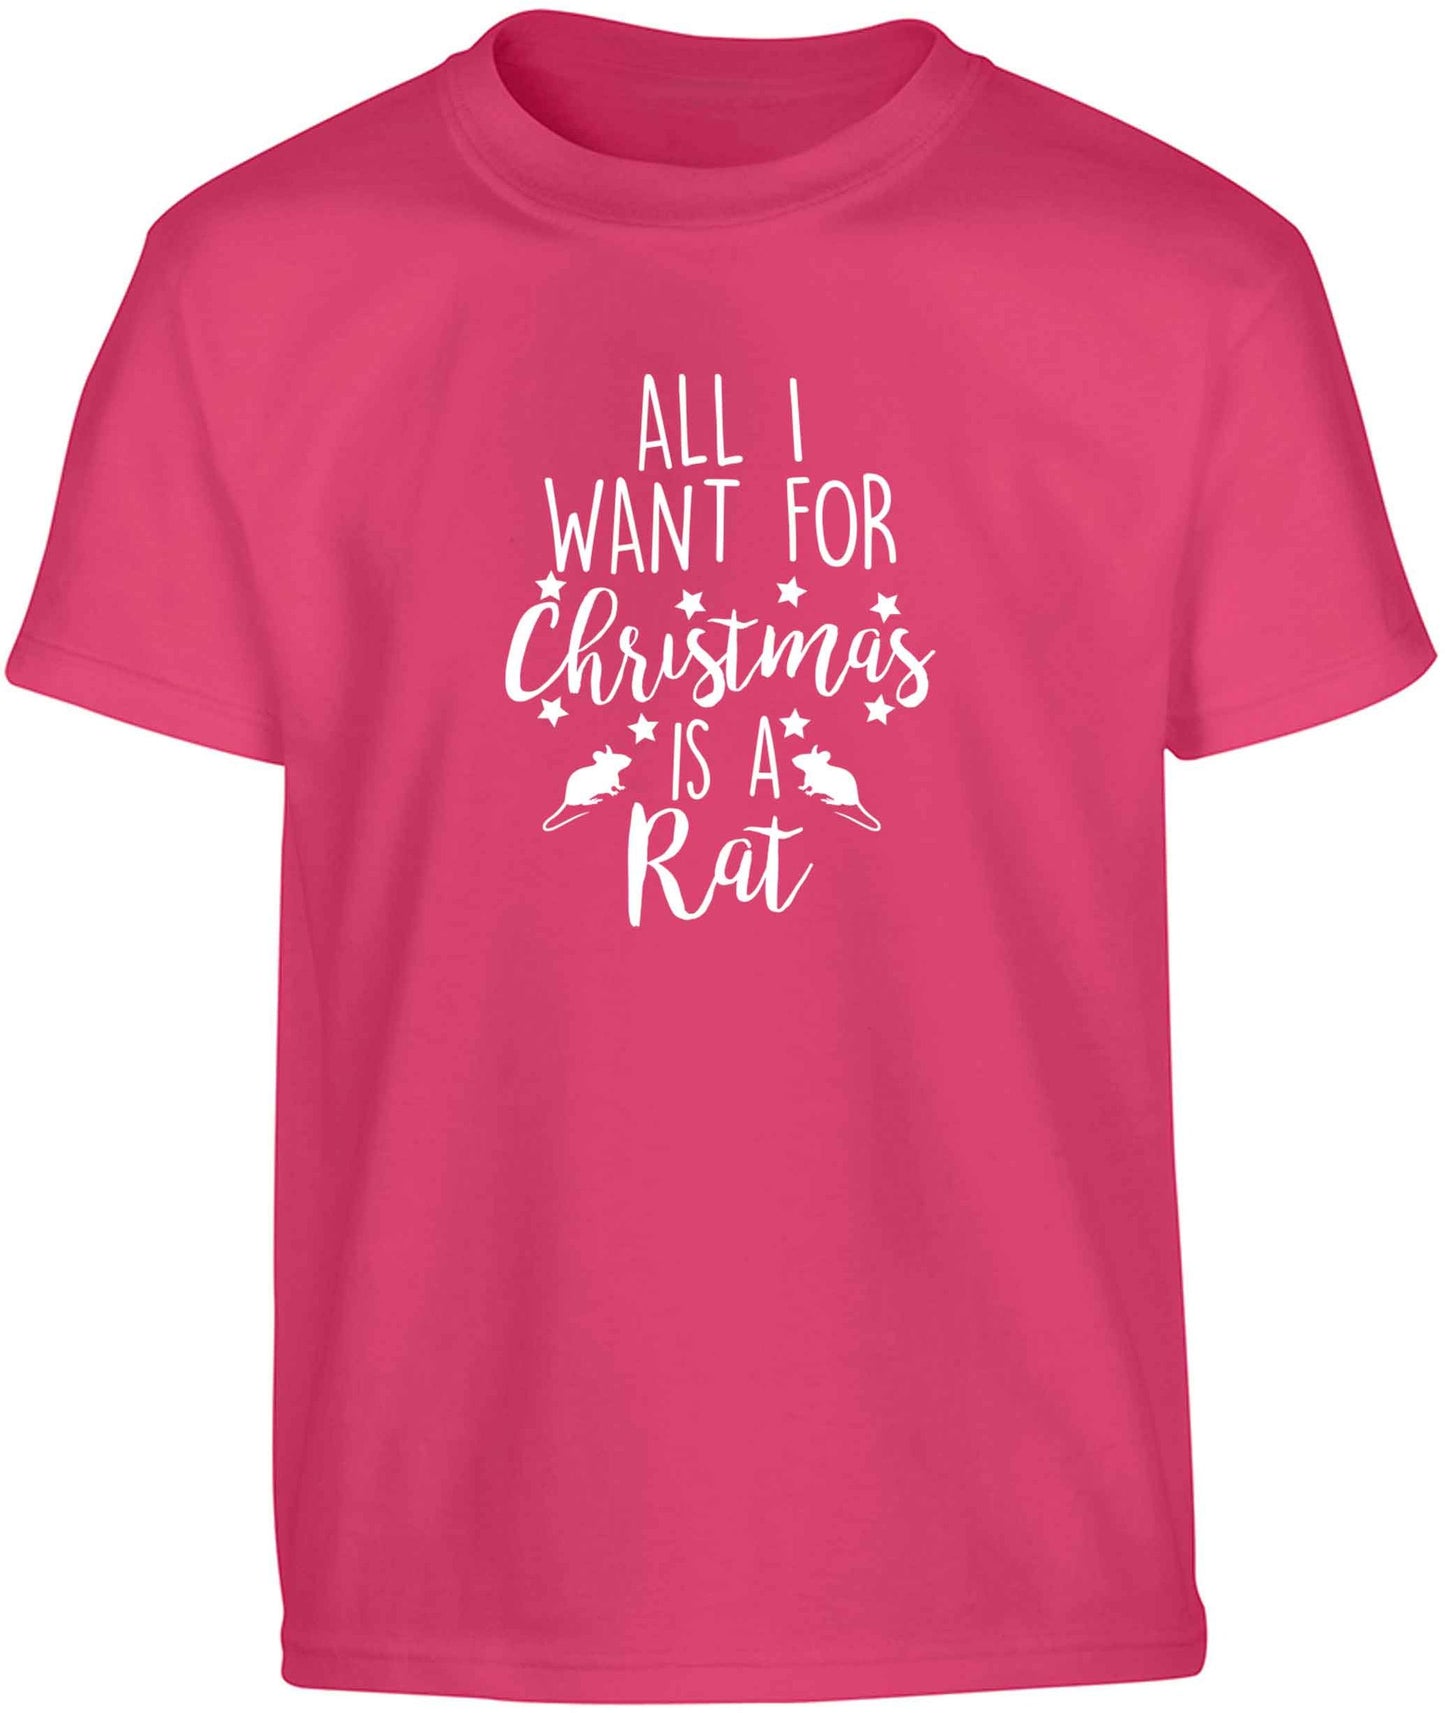 All I want for Christmas is a rat Children's pink Tshirt 12-13 Years